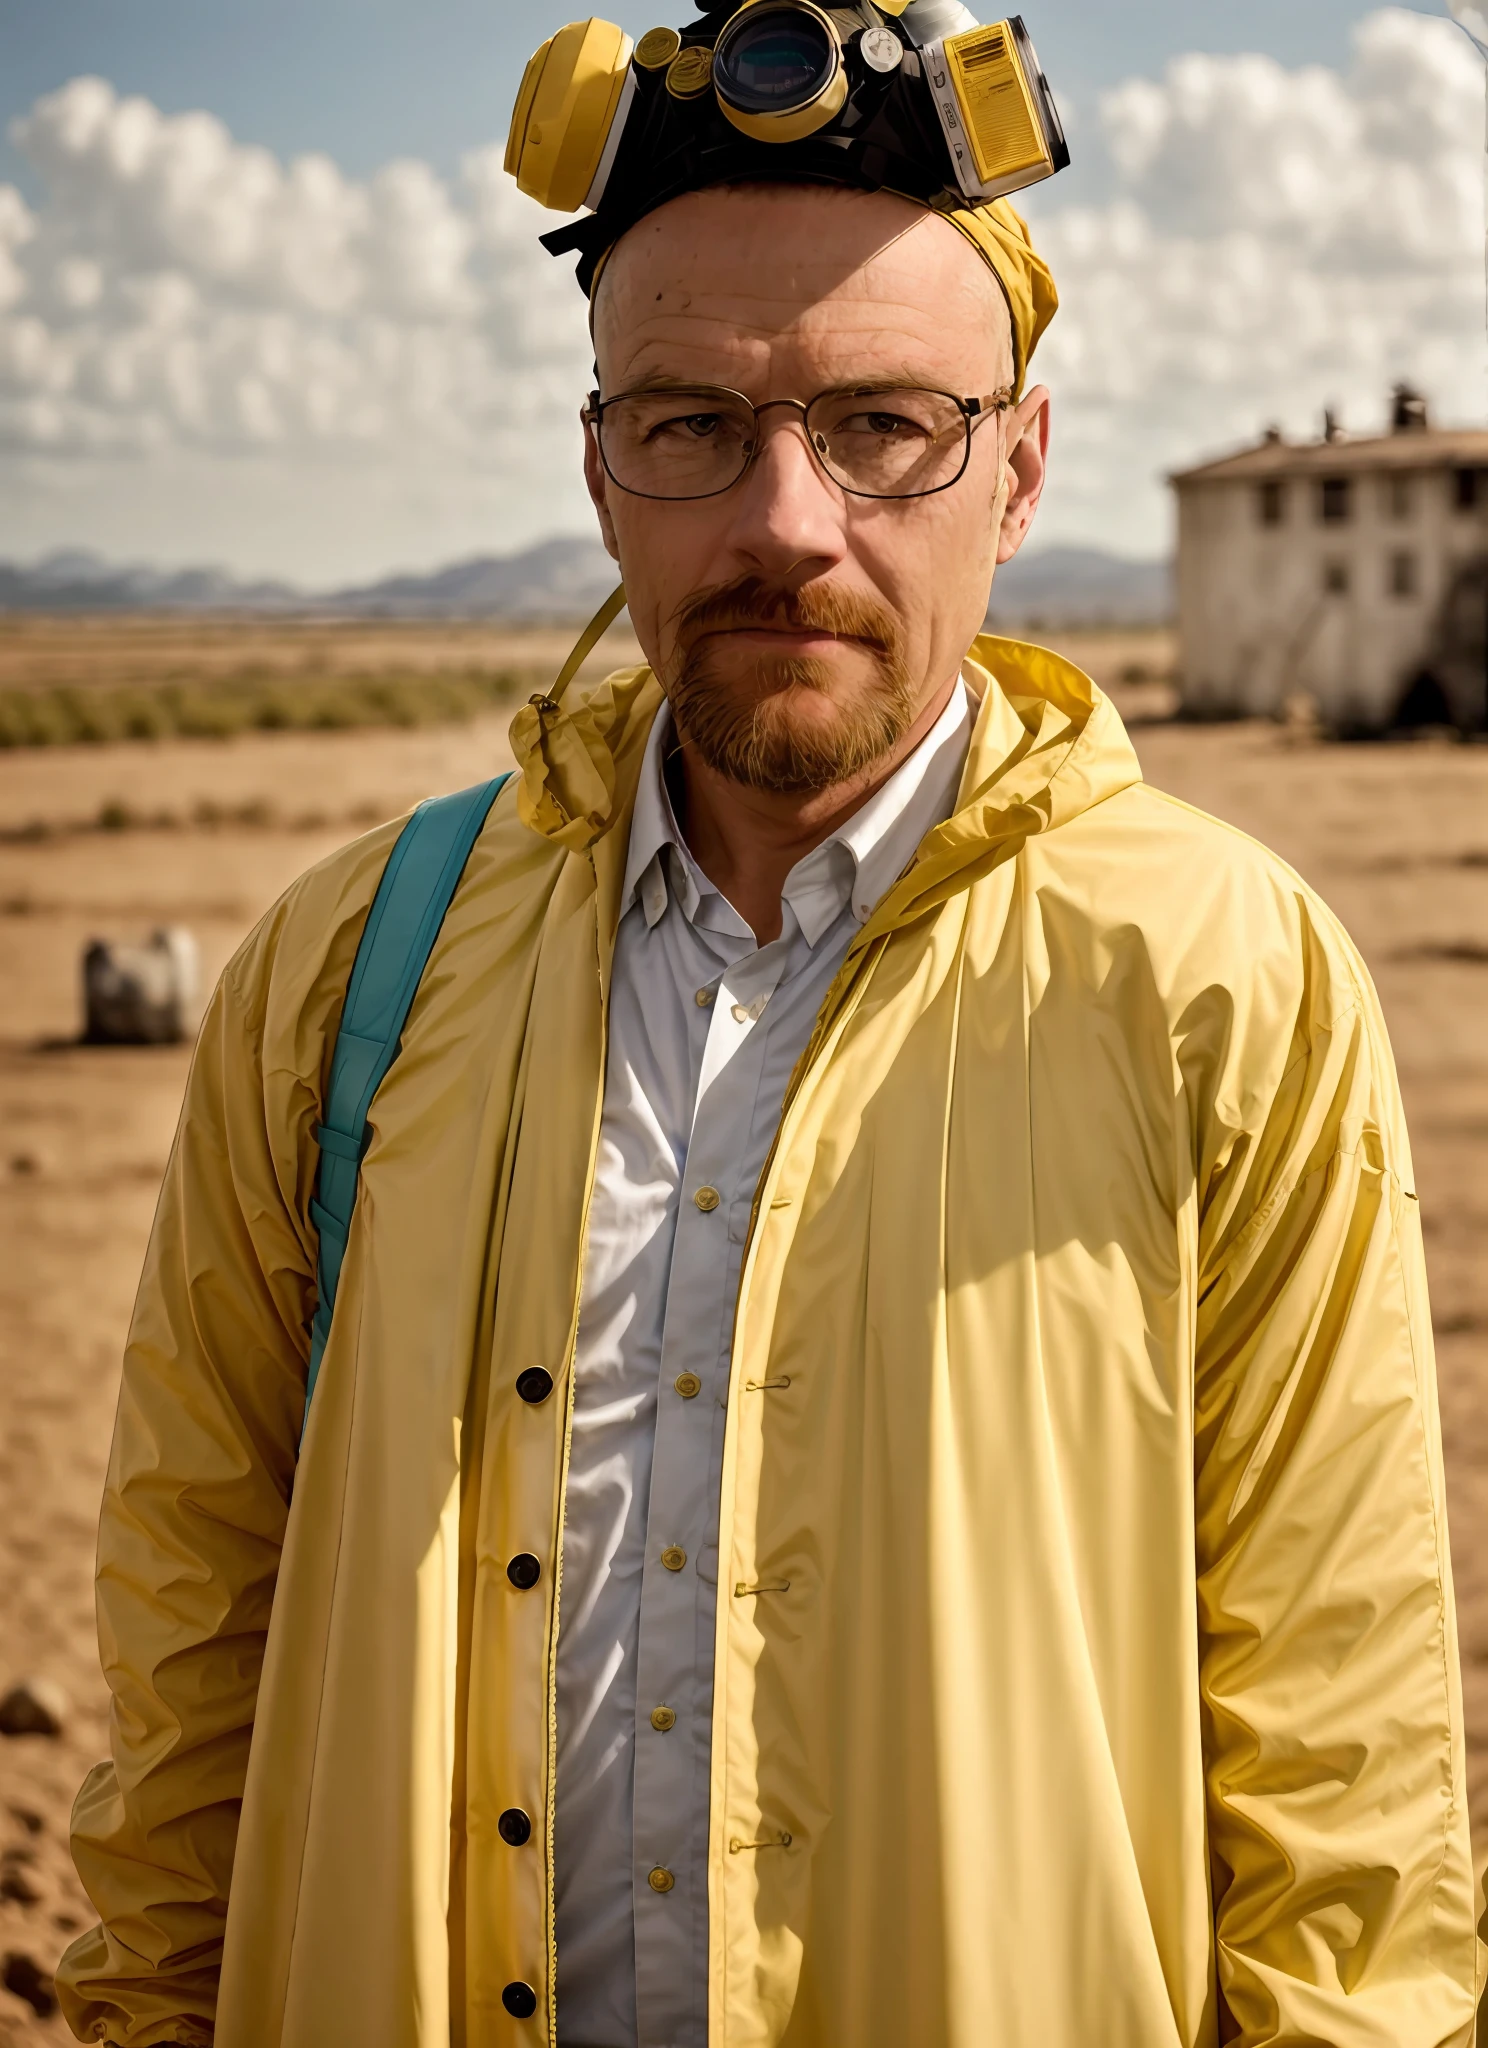 A stunning intricate full colour upper body photo of man wearing glasses, (wearing a yellow lab coat and a gas mask on the head), bald,
epic character composition,
by ilya kuvshinov, alessio albi, nina masic,
sharp focus, natural lighting, subsurface scattering, f2, 35mm, film grain